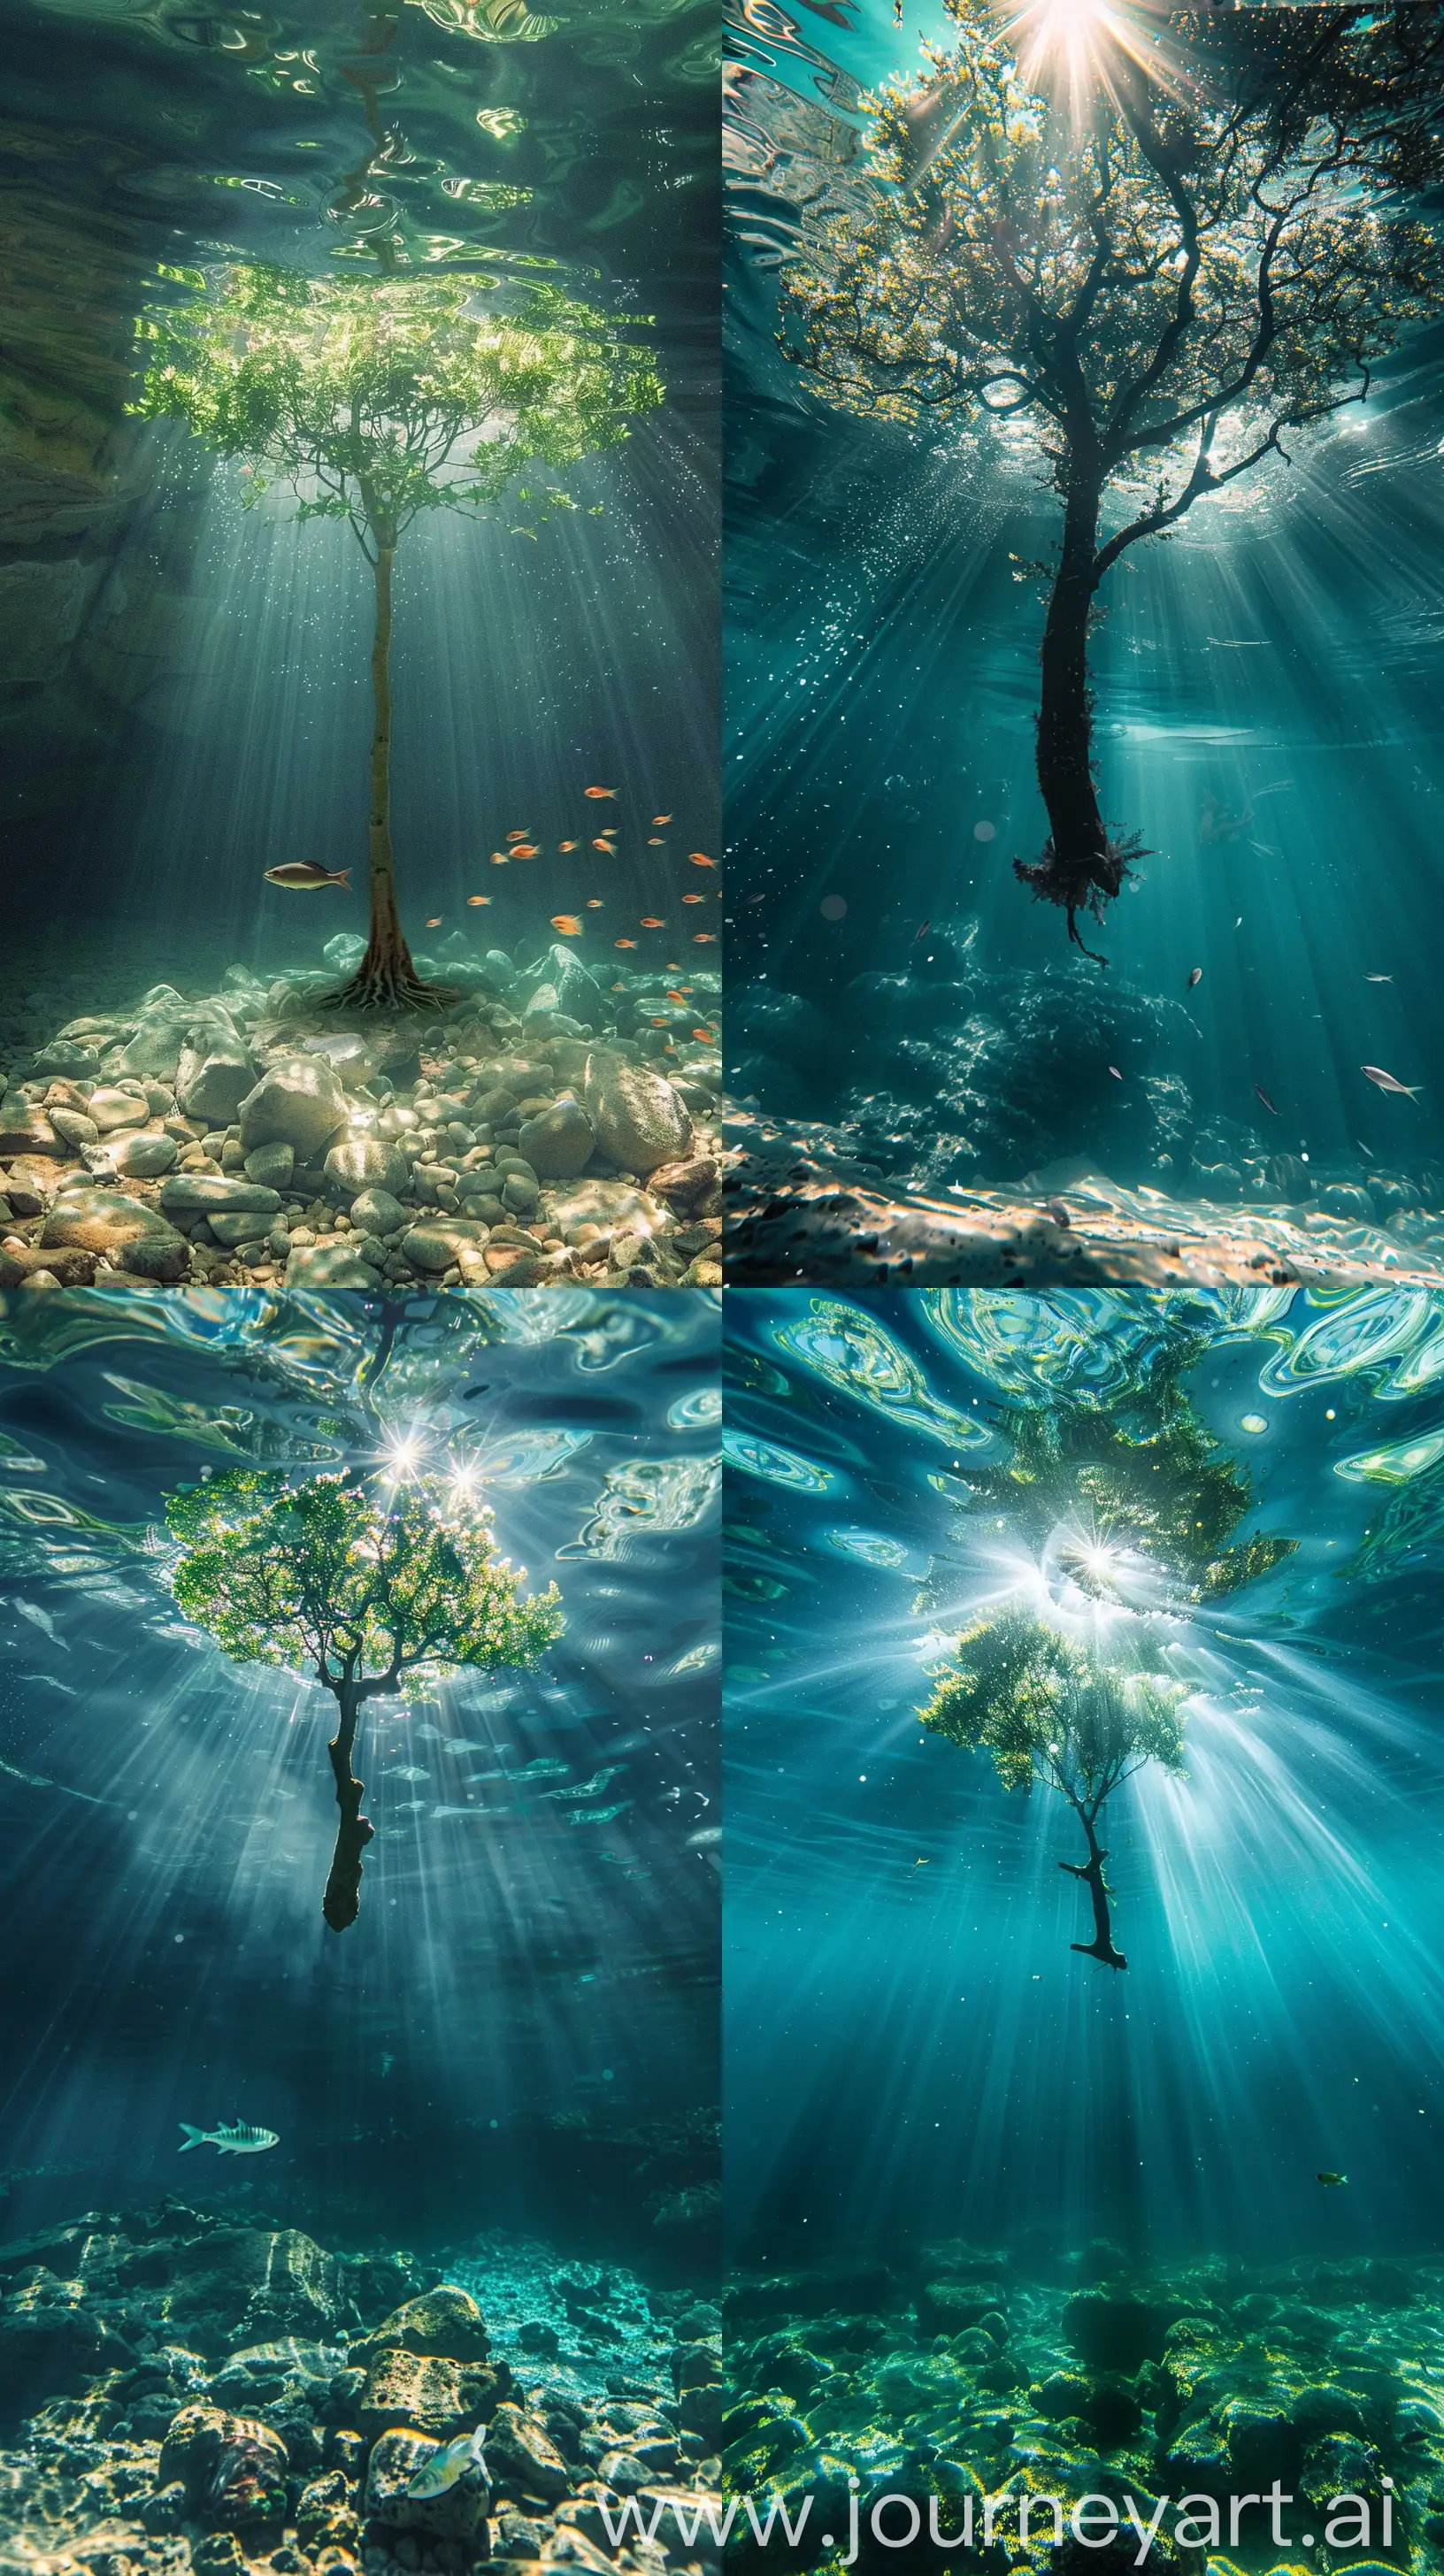 an underwater view of a pool in the middle of which the sun's rays break through, a tree grows under the water and a fish swims --ar 9:16